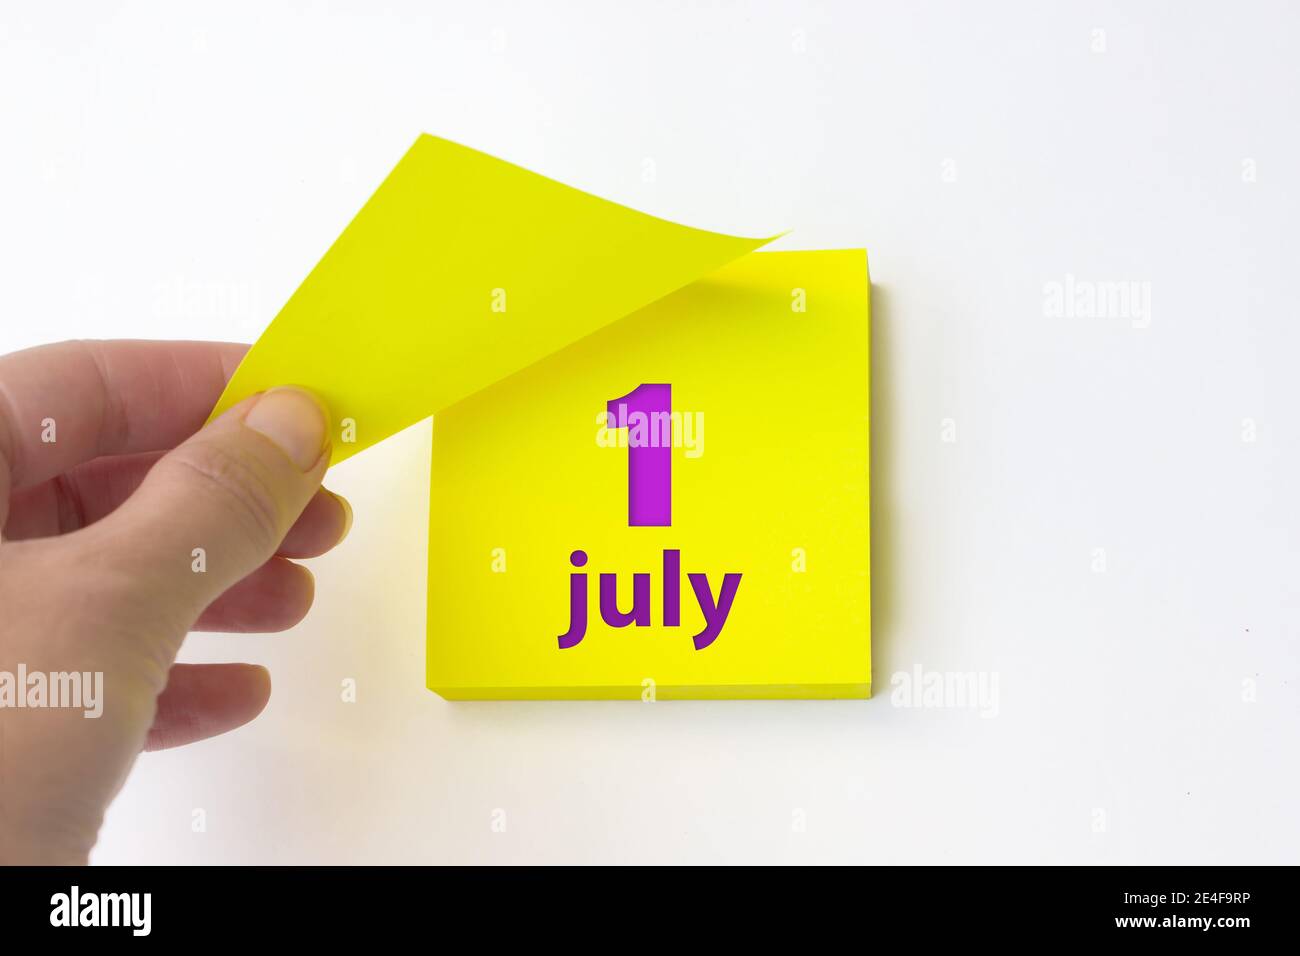 July 1st . Day 1 of month, Calendar date. Hand rips off the yellow sheet of the calendar. Summer month, day of the year concept Stock Photo